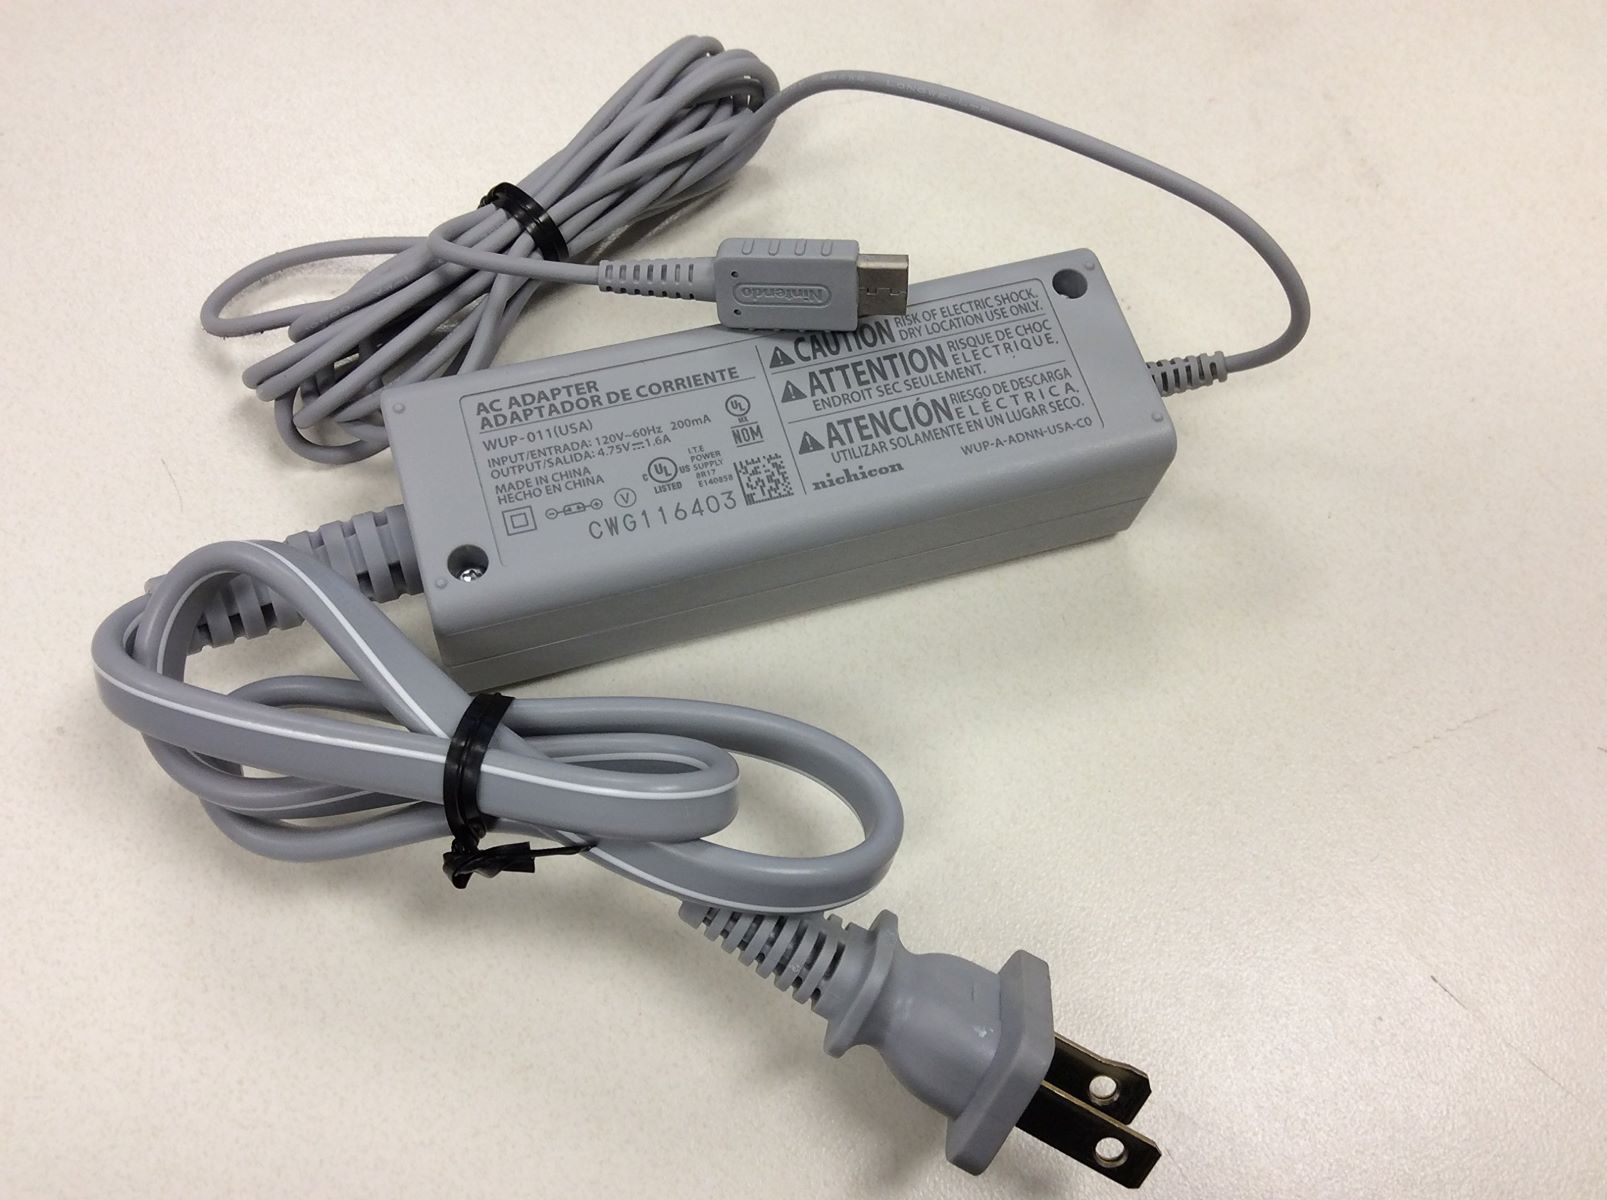 Compatible Cords For Wii U Gamepad: A Quick Guide